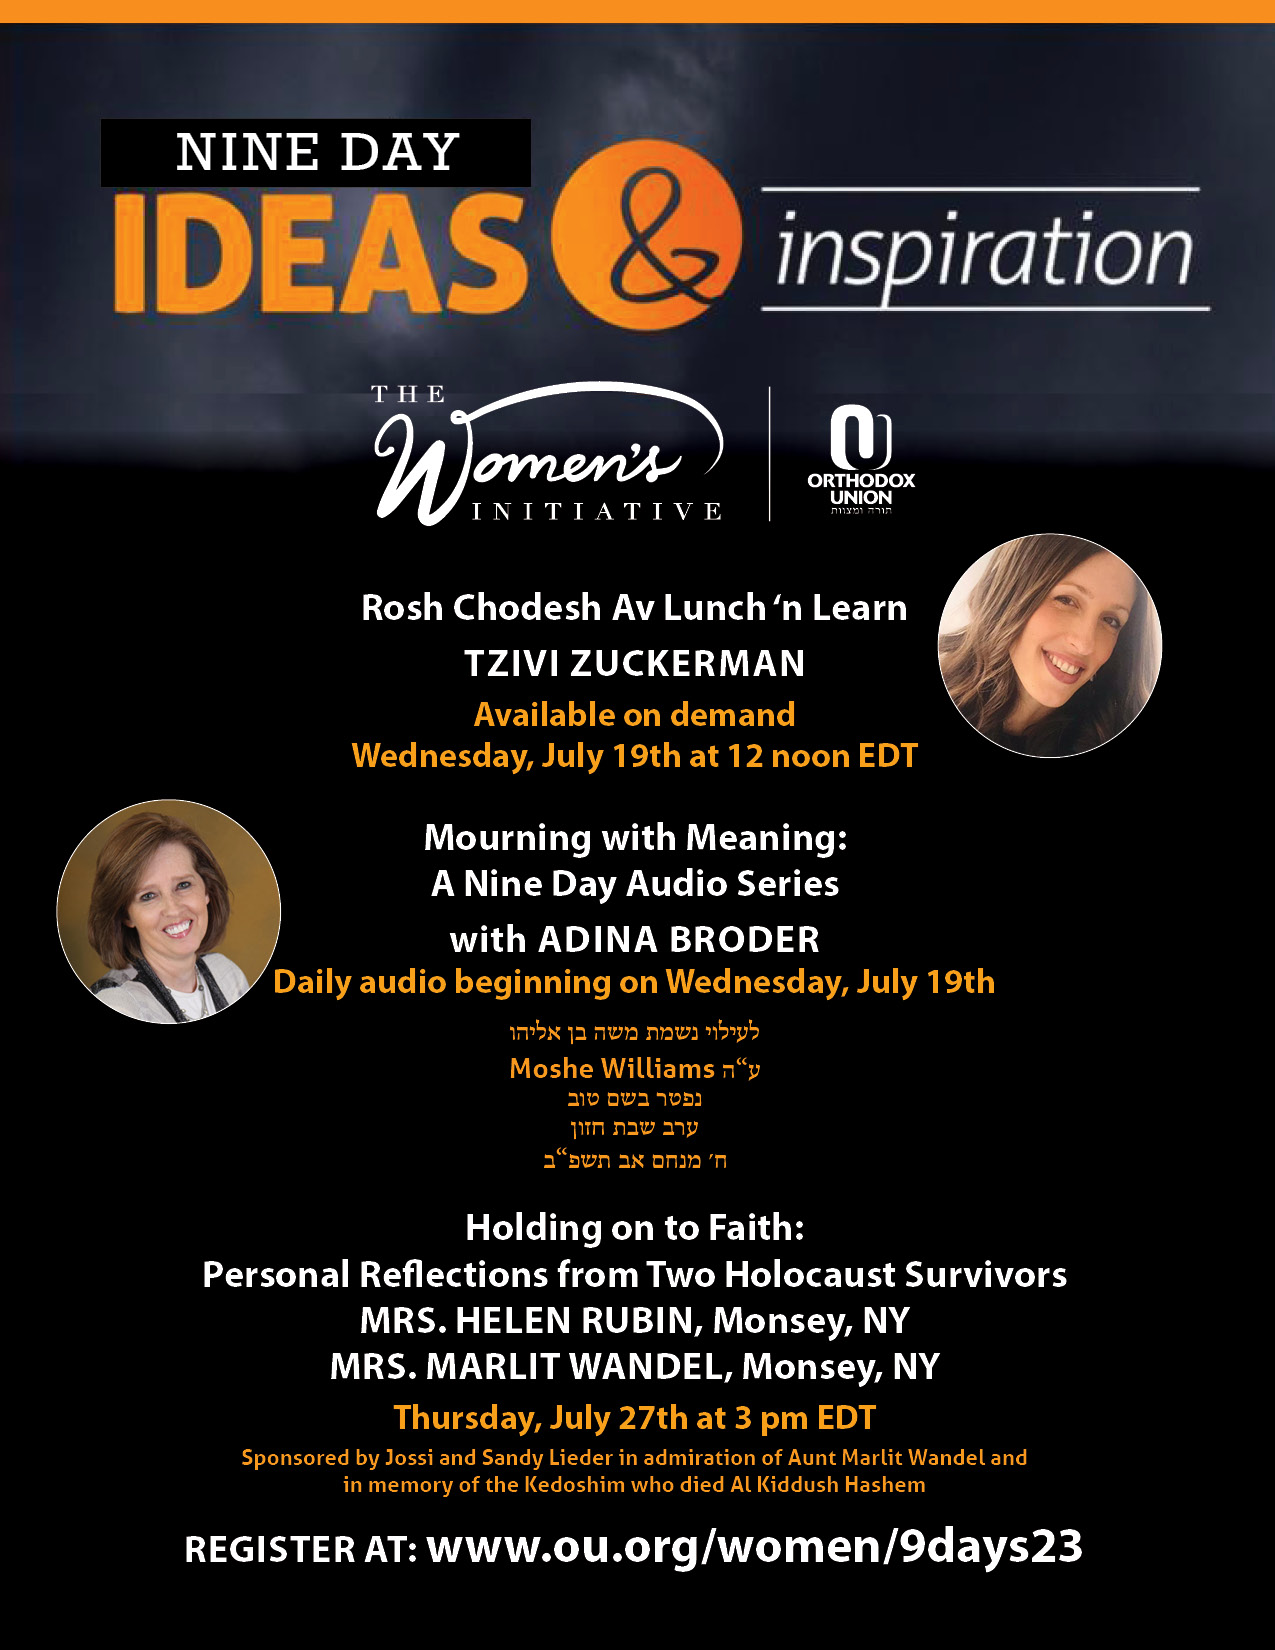 9 Days Ideas and Inspiration Programming